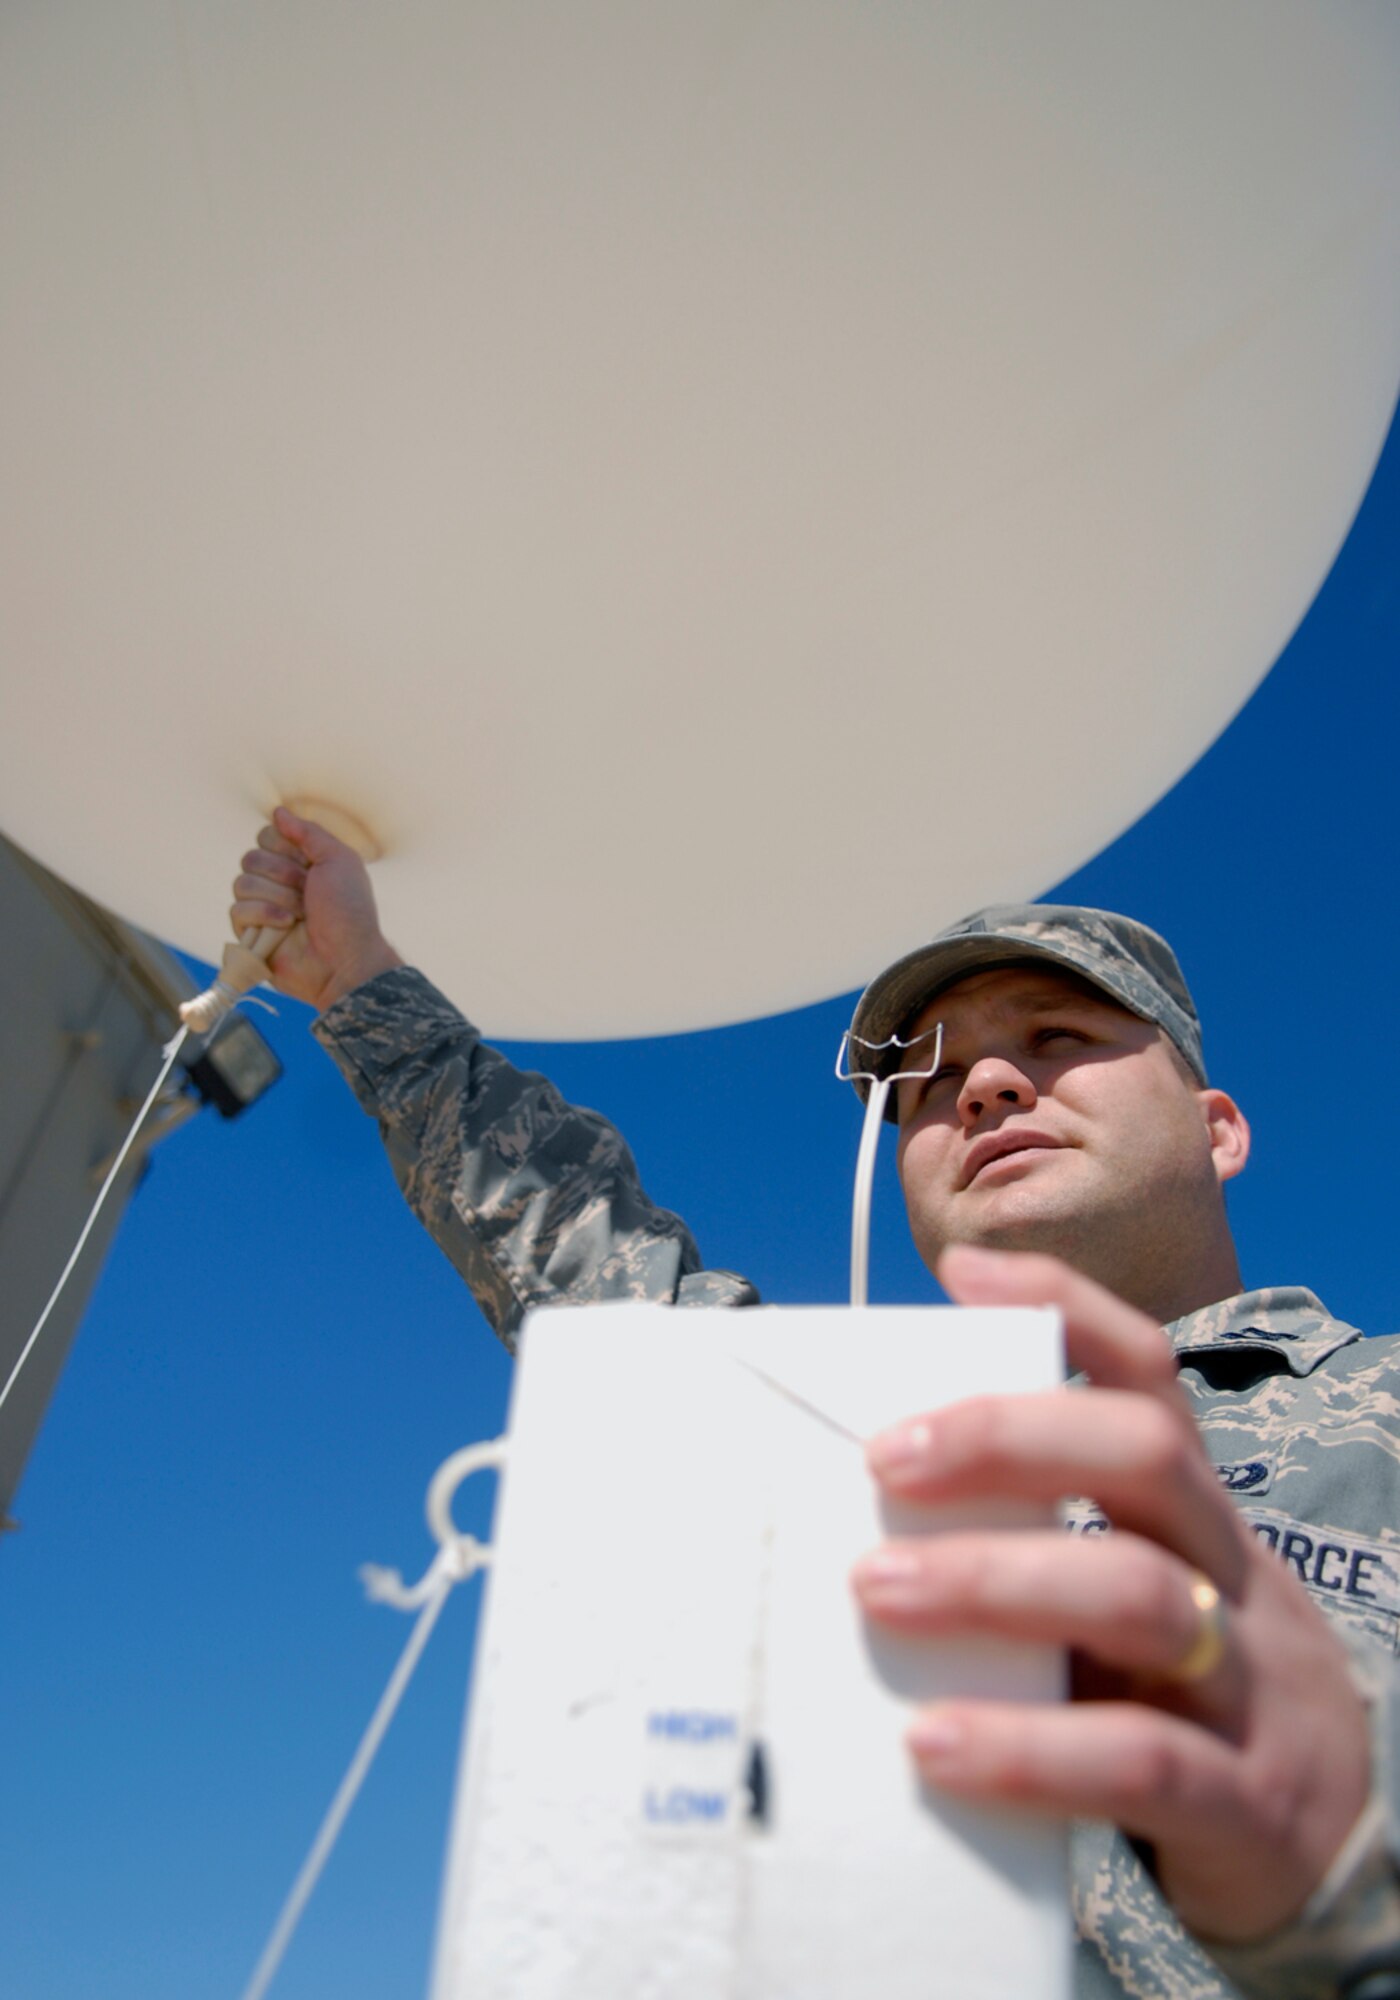 VANDENBERG AIR FORCE BASE, Calif. -- Capt. Andrew Frey, 30th Weather Squadron officer, prepares to release a weather balloon here Feb. 25. The weather balloons can reach heights of 110,000 ft. and attains weather information every 100 ft. (U.S. Air Force photo / Senior Airman Christopher Hubenthal)